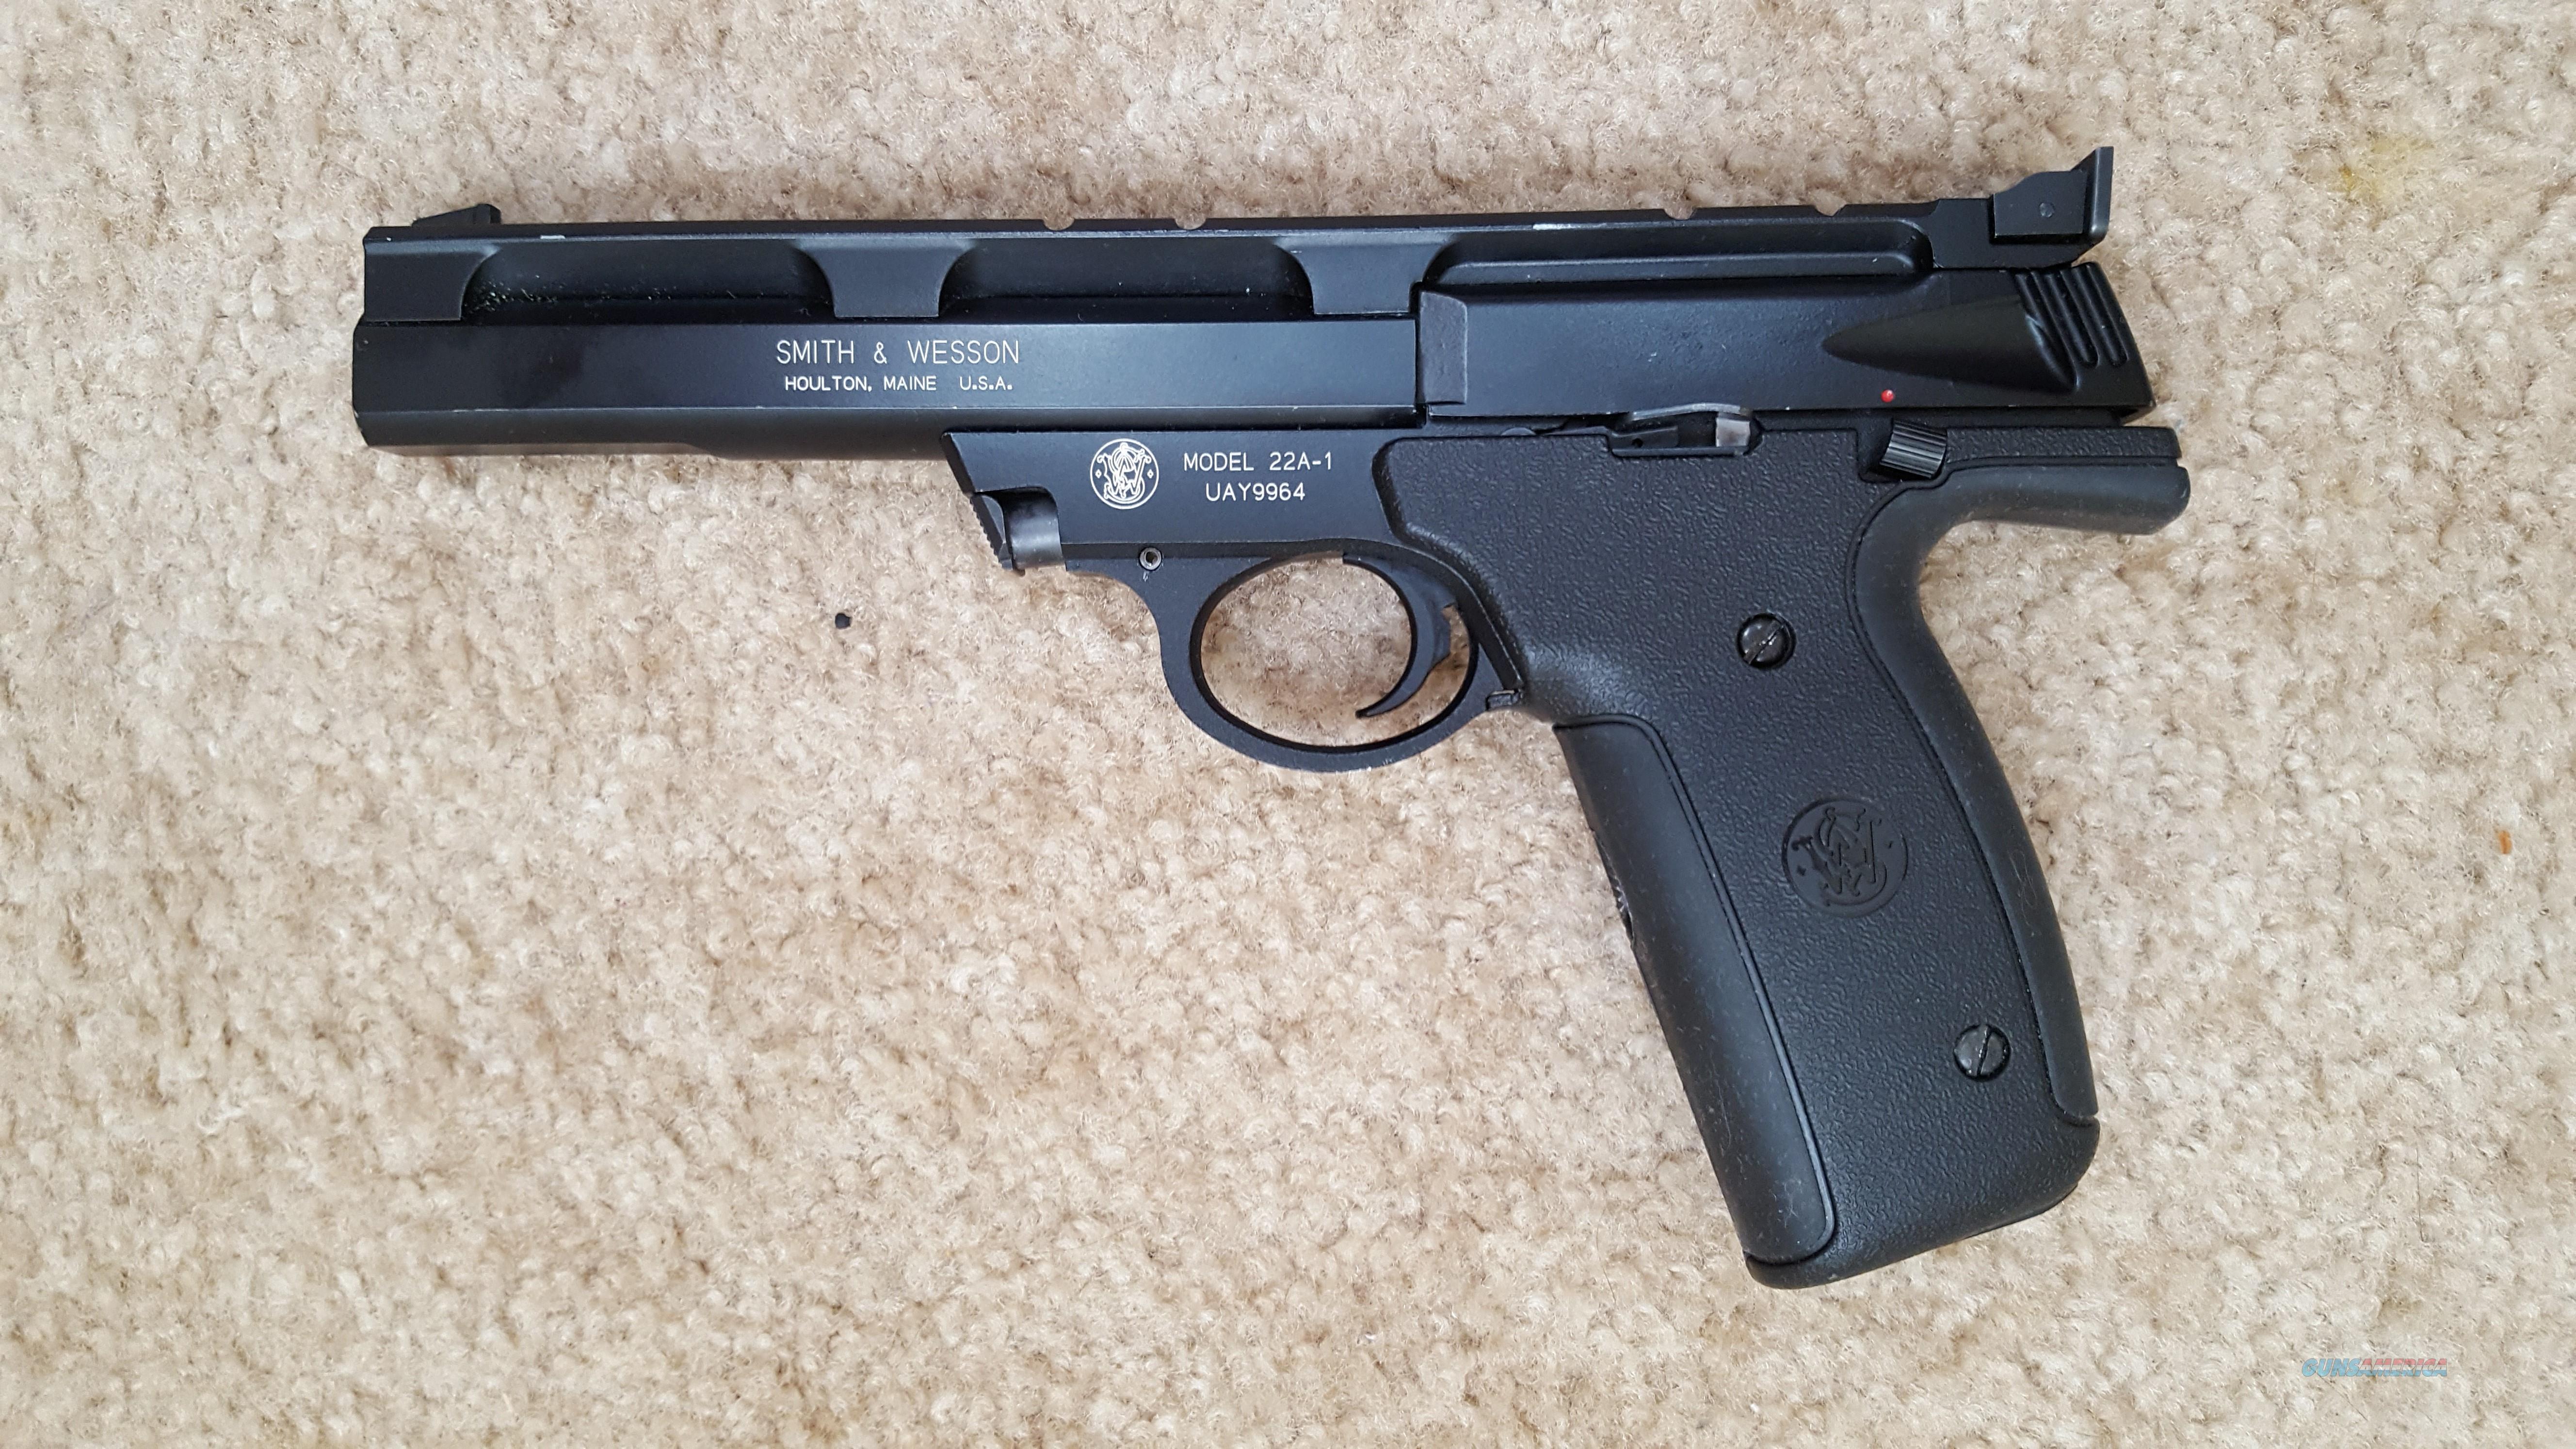 Smith And Wesson 22a 1 22lr Target Pistol 5 5 B For Sale